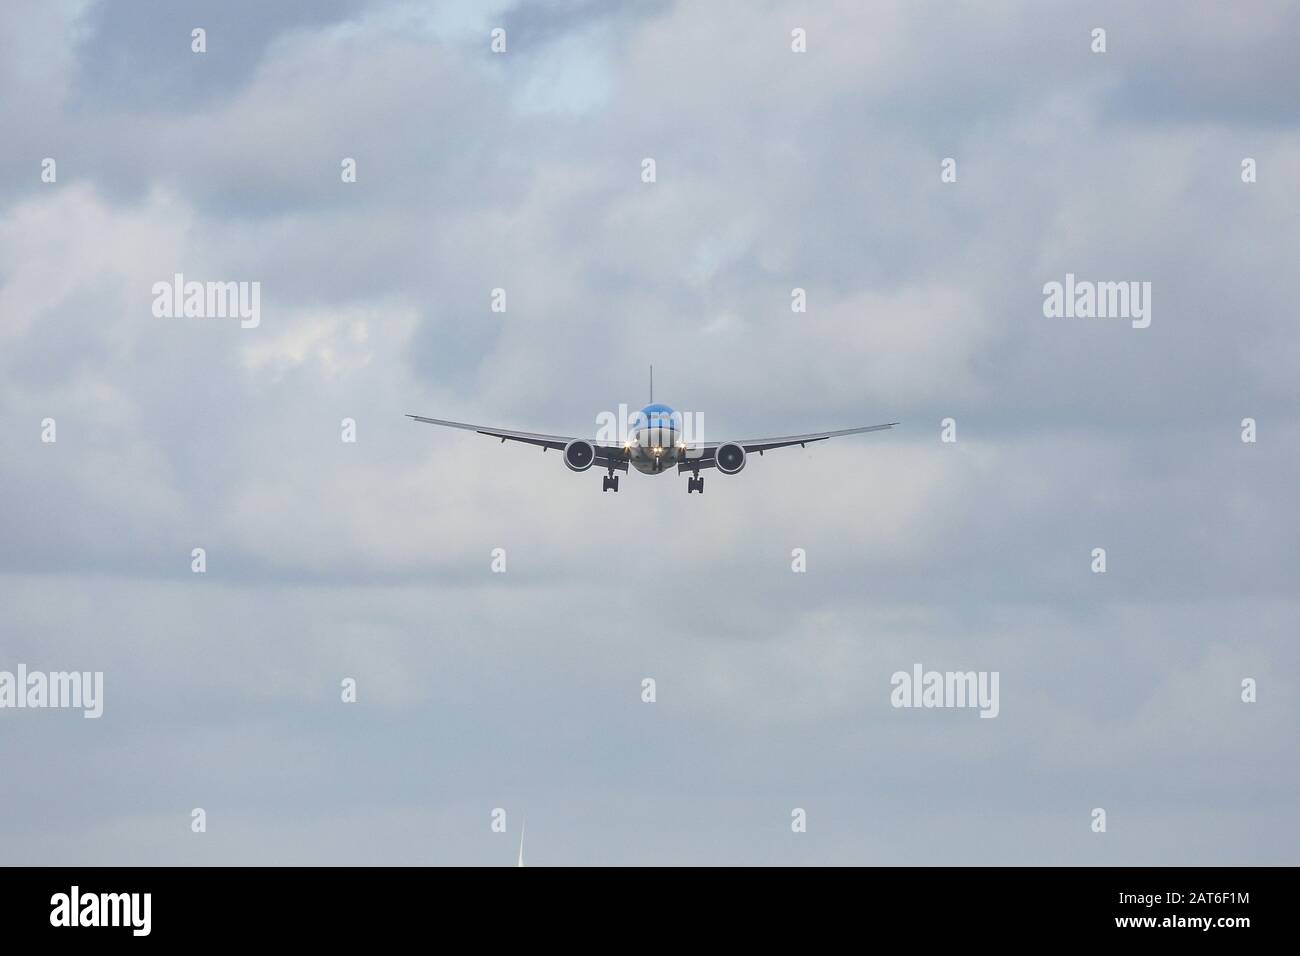 Amsterdam, Netherlands. 26th Jan, 2020. A KLM Royal Dutch Airlines Boeing 777-300 wide-body aircraft lands at Amsterdam Schiphol AMS EHAM Airport in the Netherlands at Polderbaan runway. The airplane has ETOPS certification for transatlantic flight. Credit: Nik Oiko/SOPA Images/ZUMA Wire/Alamy Live News Stock Photo